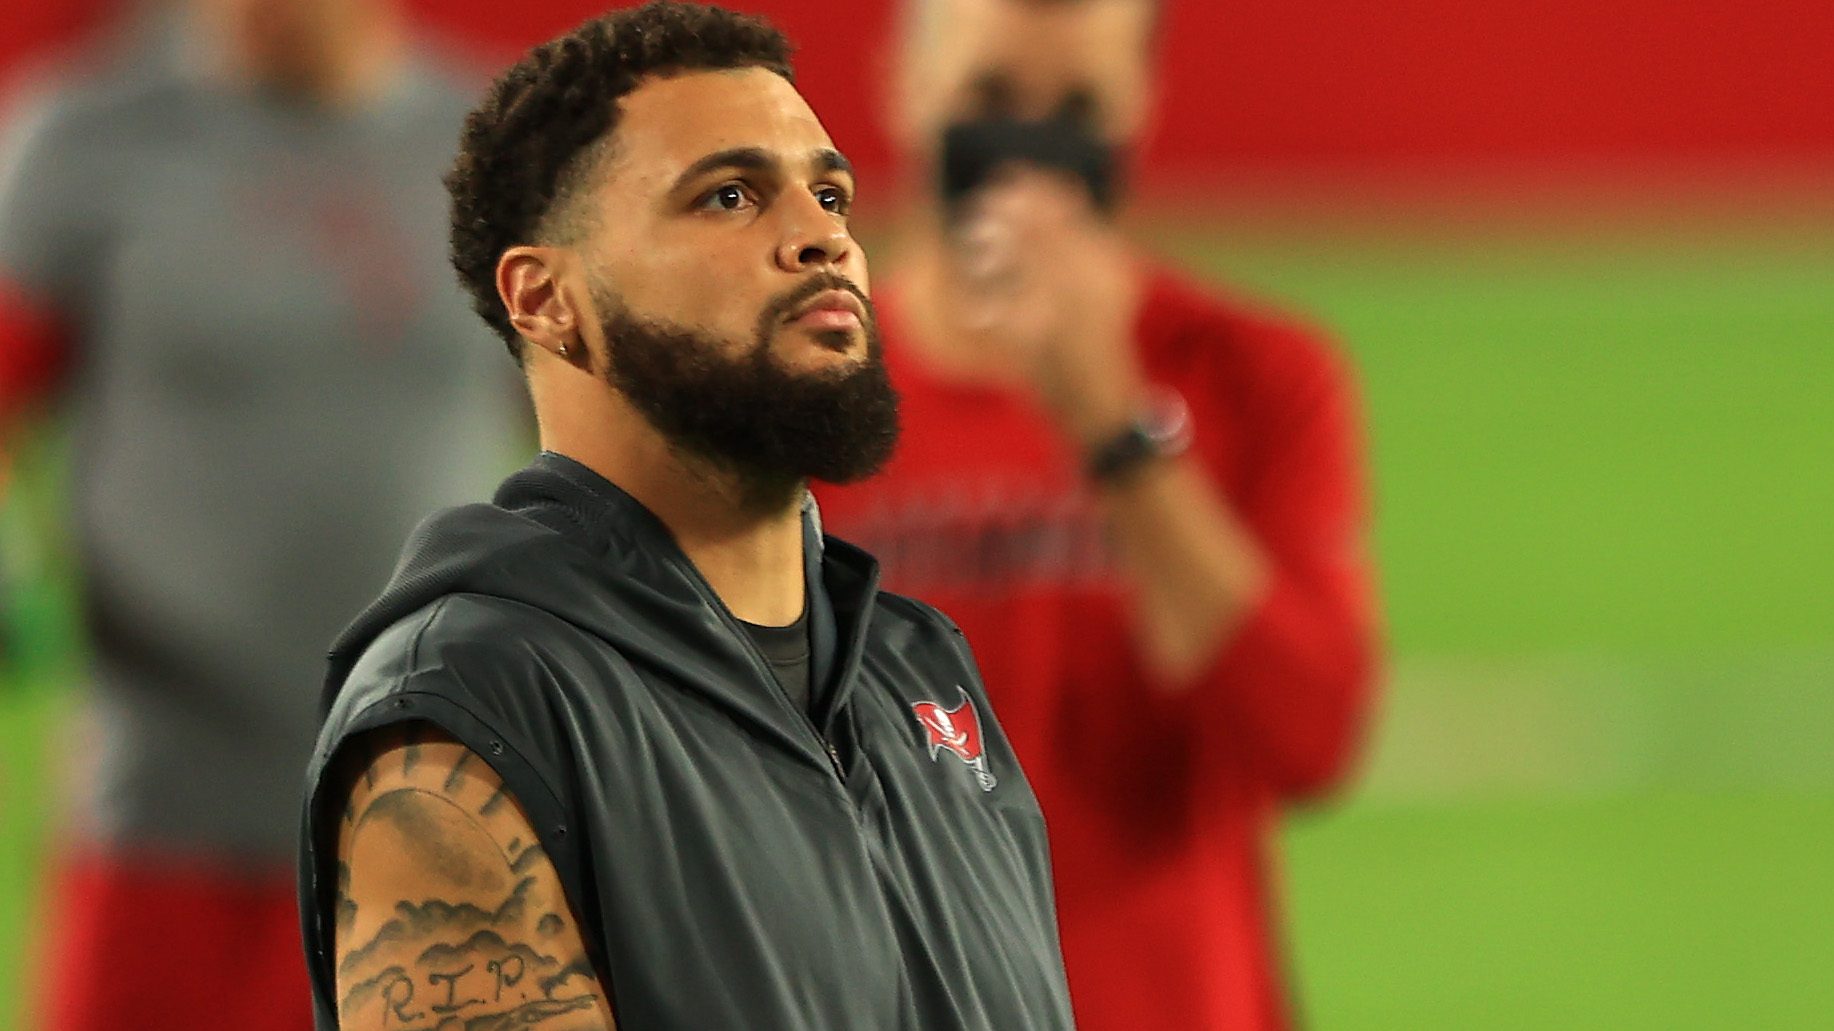 Bucs Get MRI Results on Mike Evans Injury Report